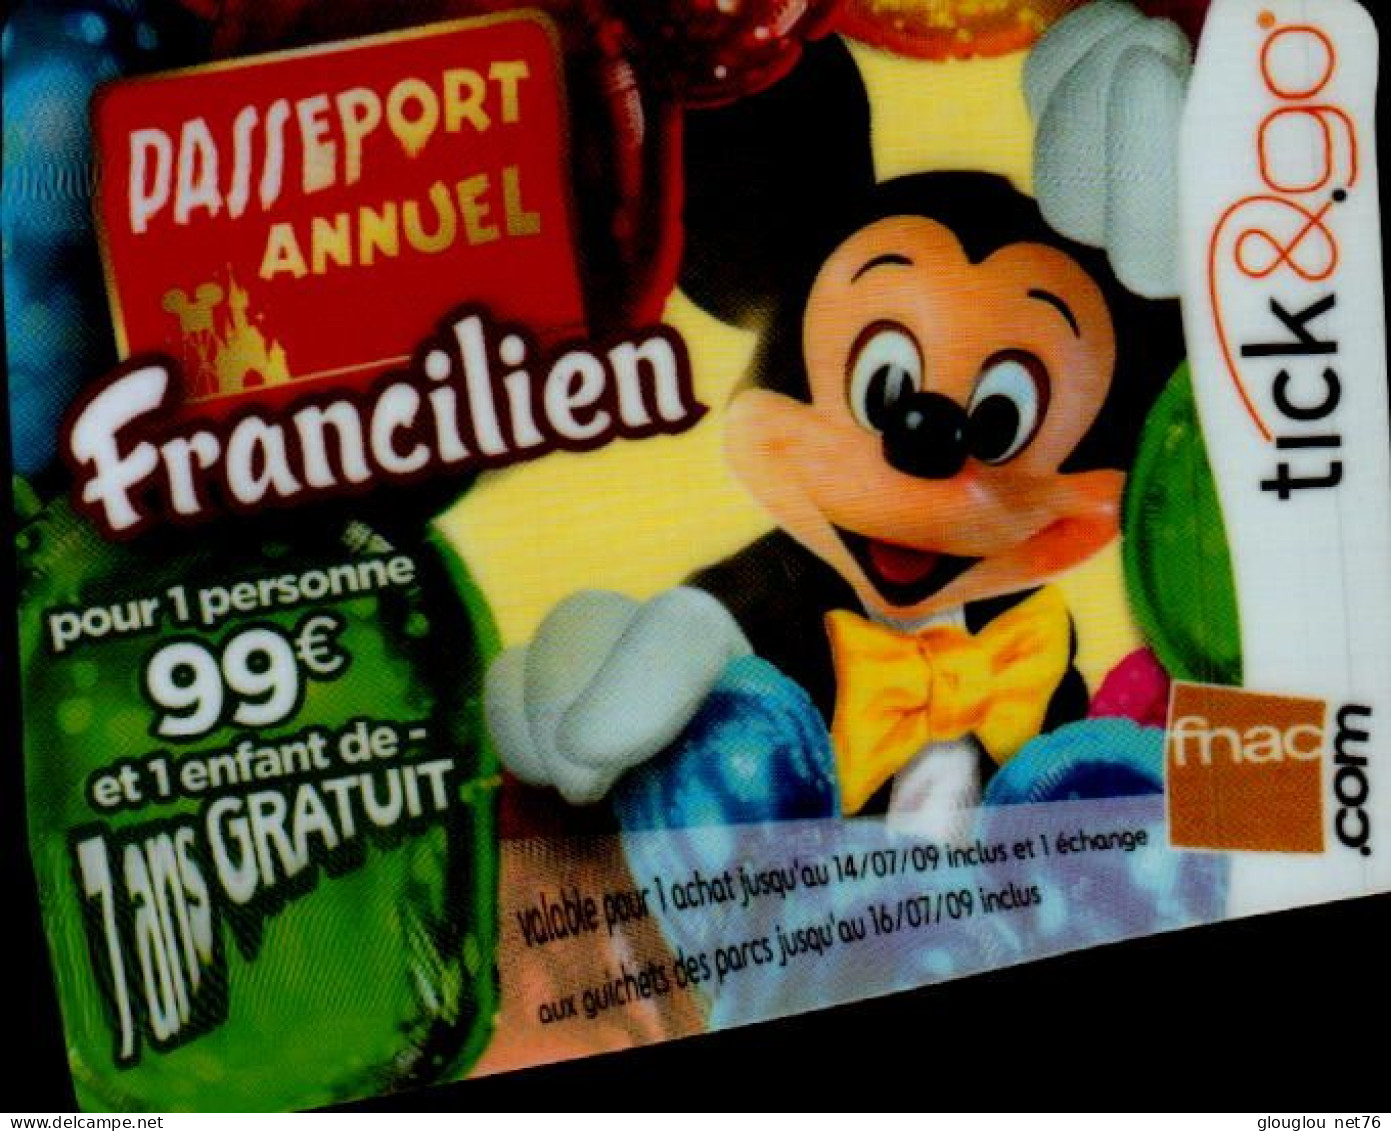 CARTE CADEAU  FNAC Passeport Annuel Francilien  DISNEY - Gift And Loyalty Cards